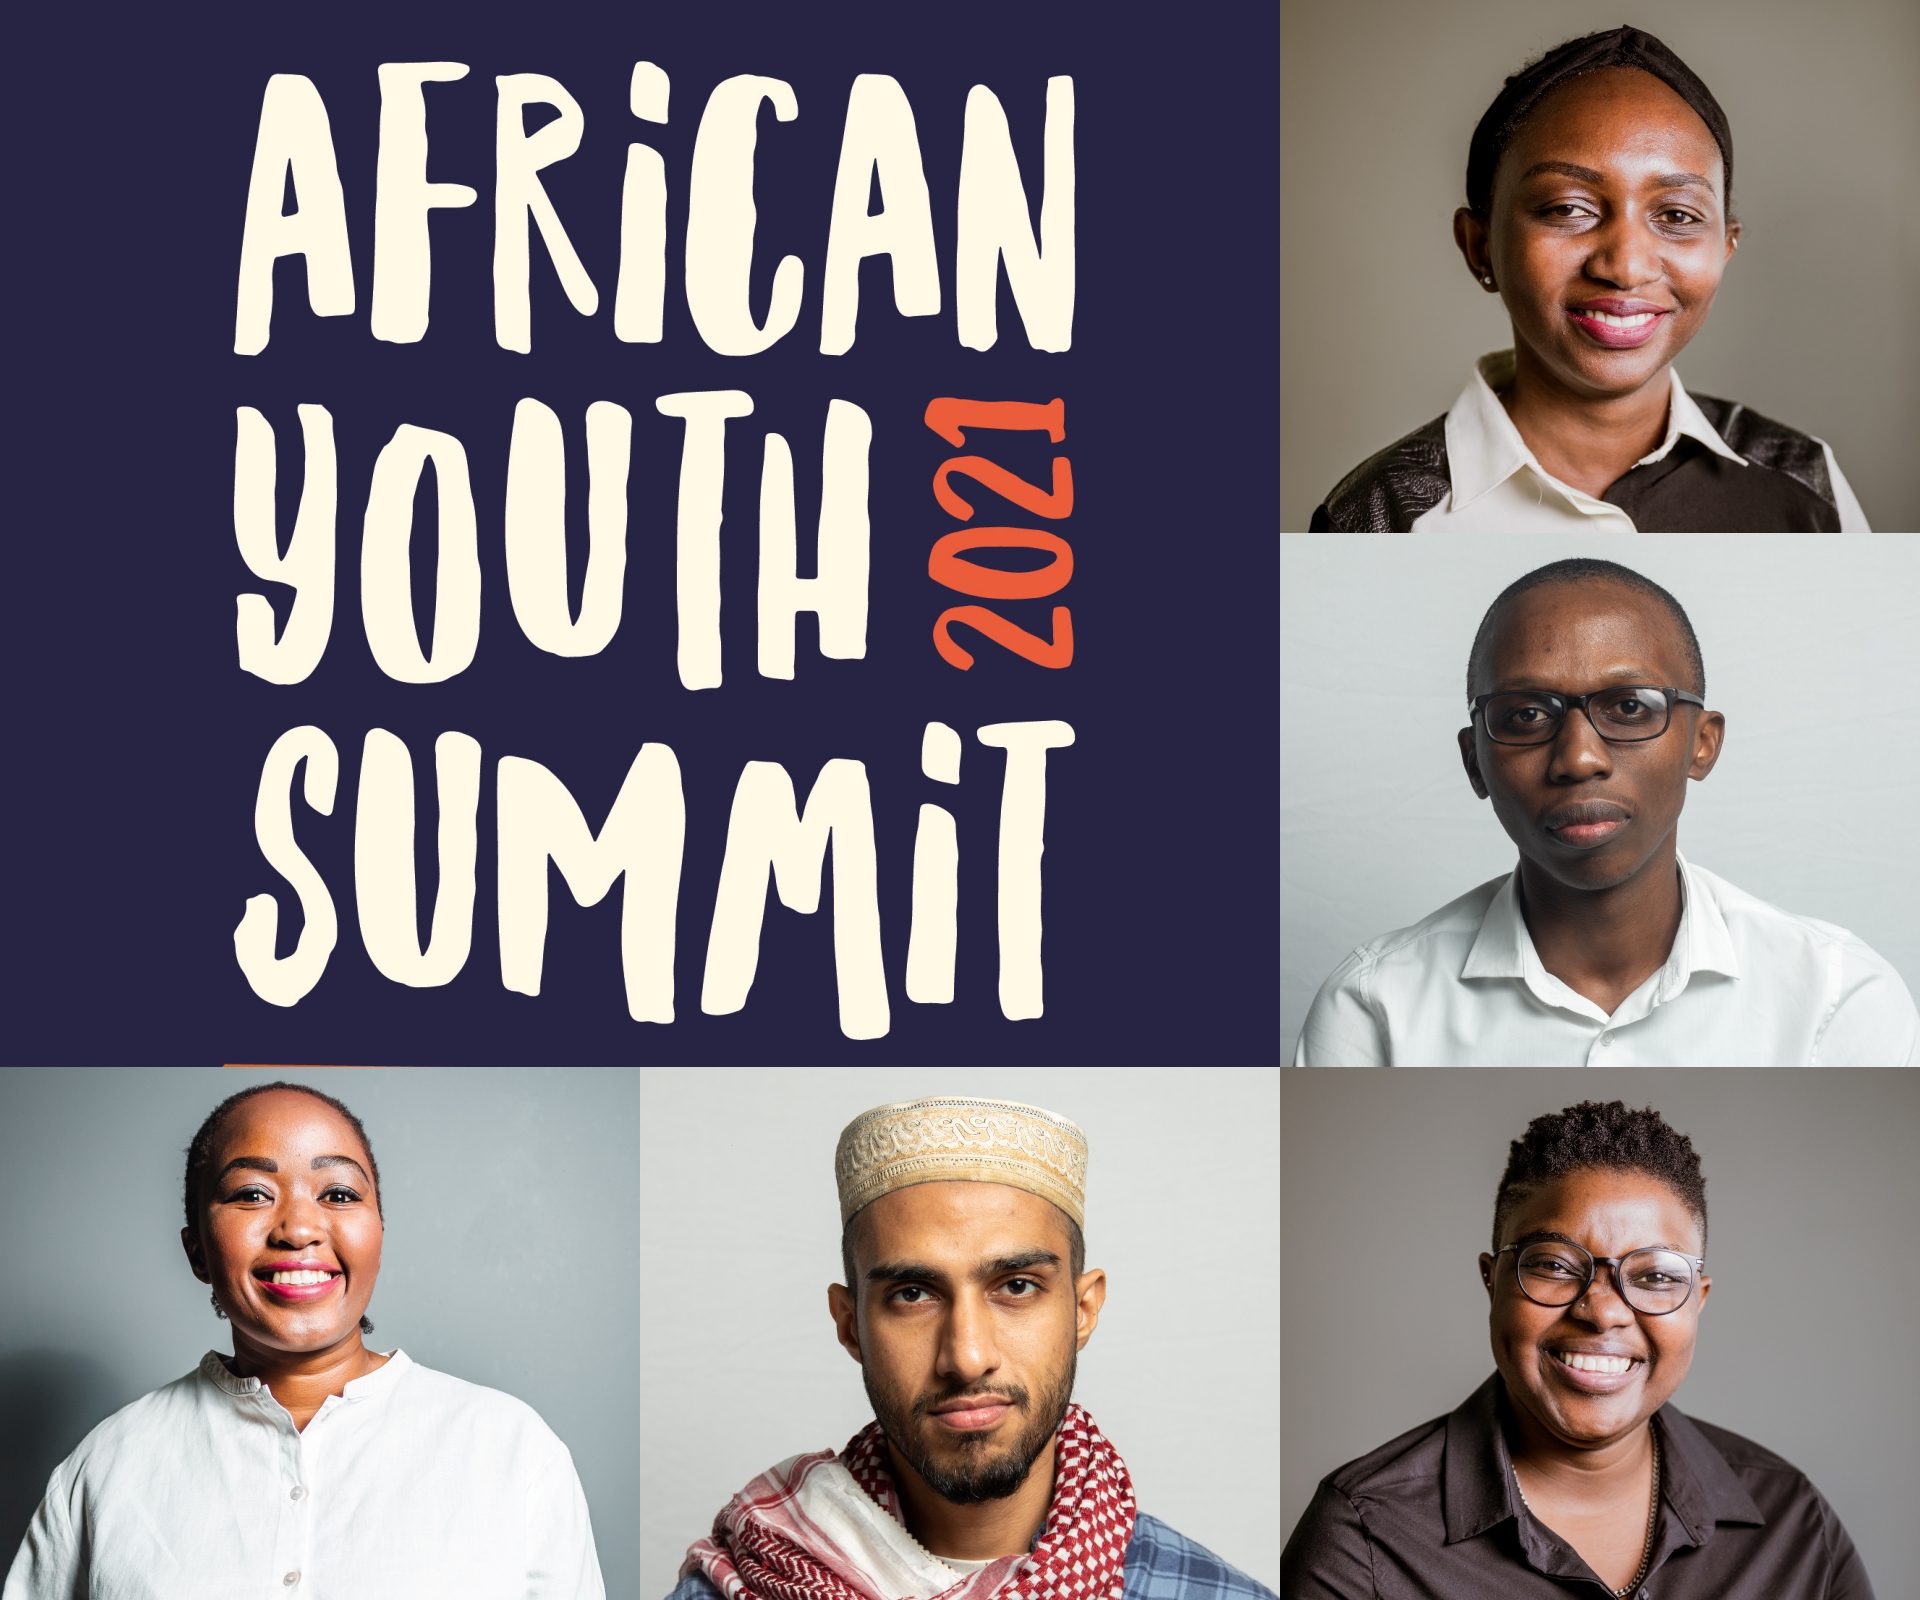 African Youth Summit 2021 banner text surrounded by five faces of participants.